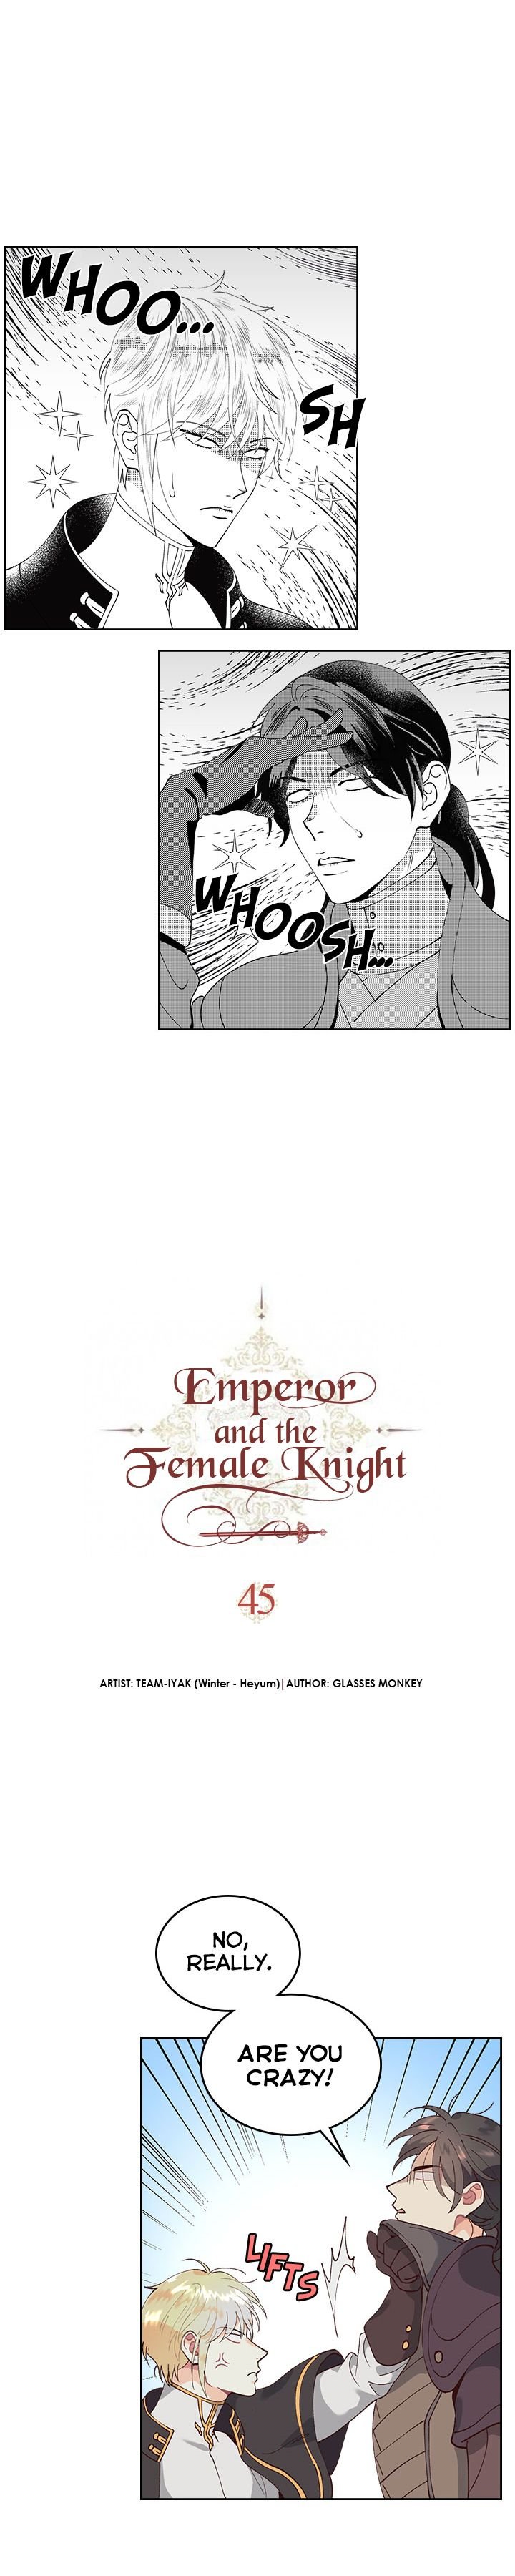 Emperor And The Female Knight ( The King and His Knight ) Chapter 45 - Page 1